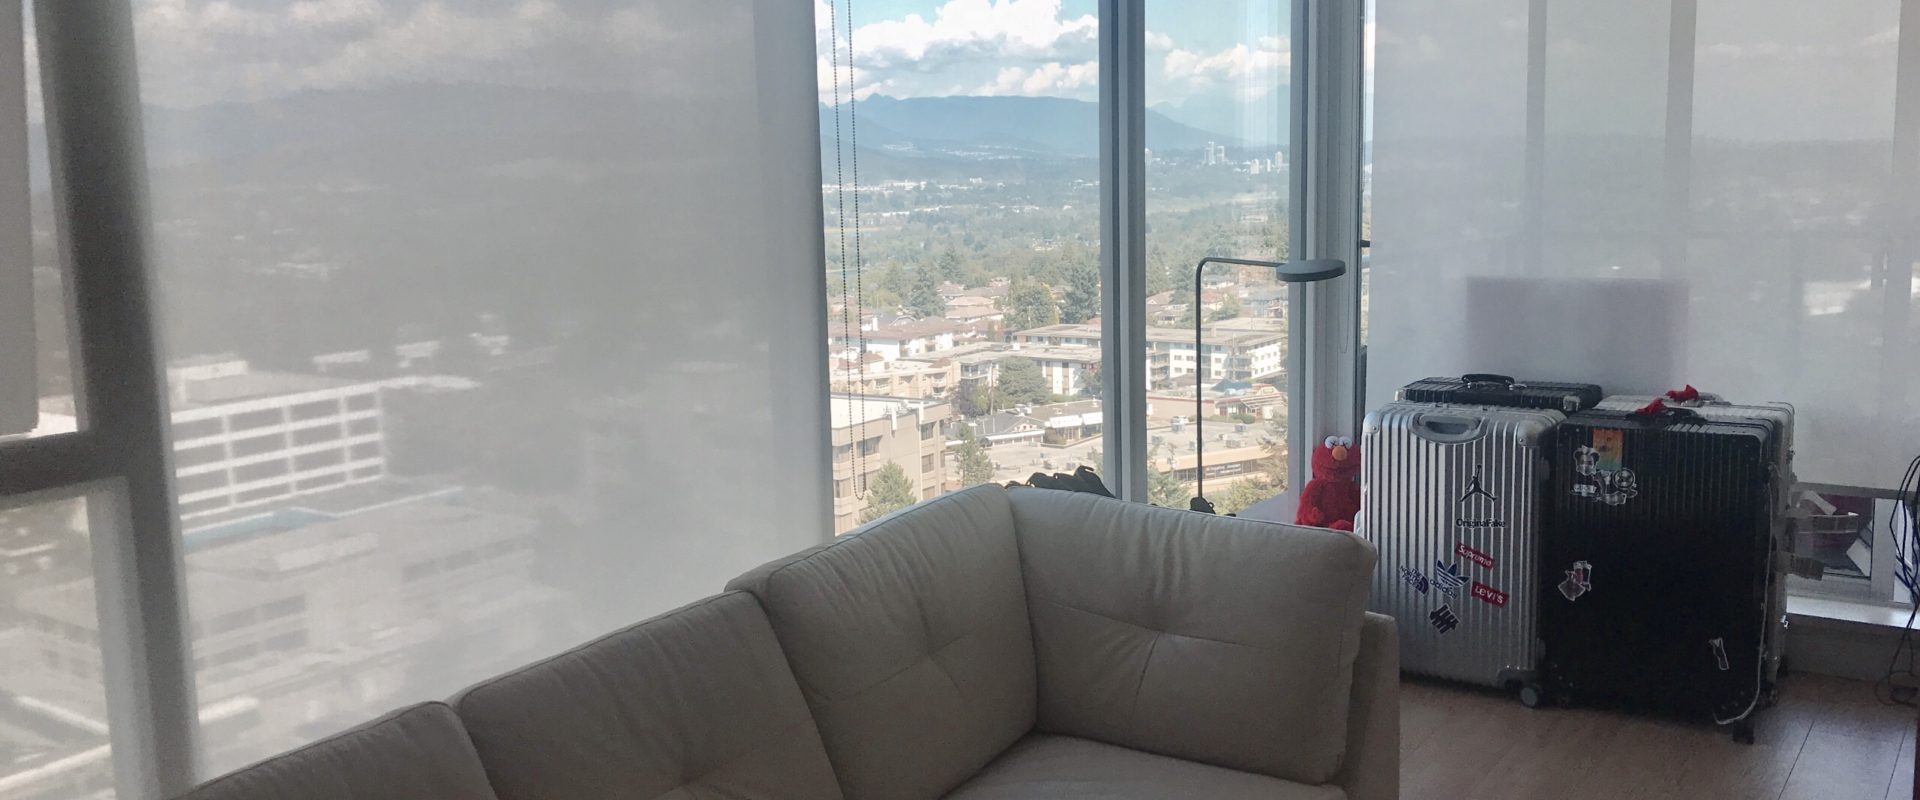 Burnaby Brand New 2br 2ba luxurious condo near Metrotown for rent!